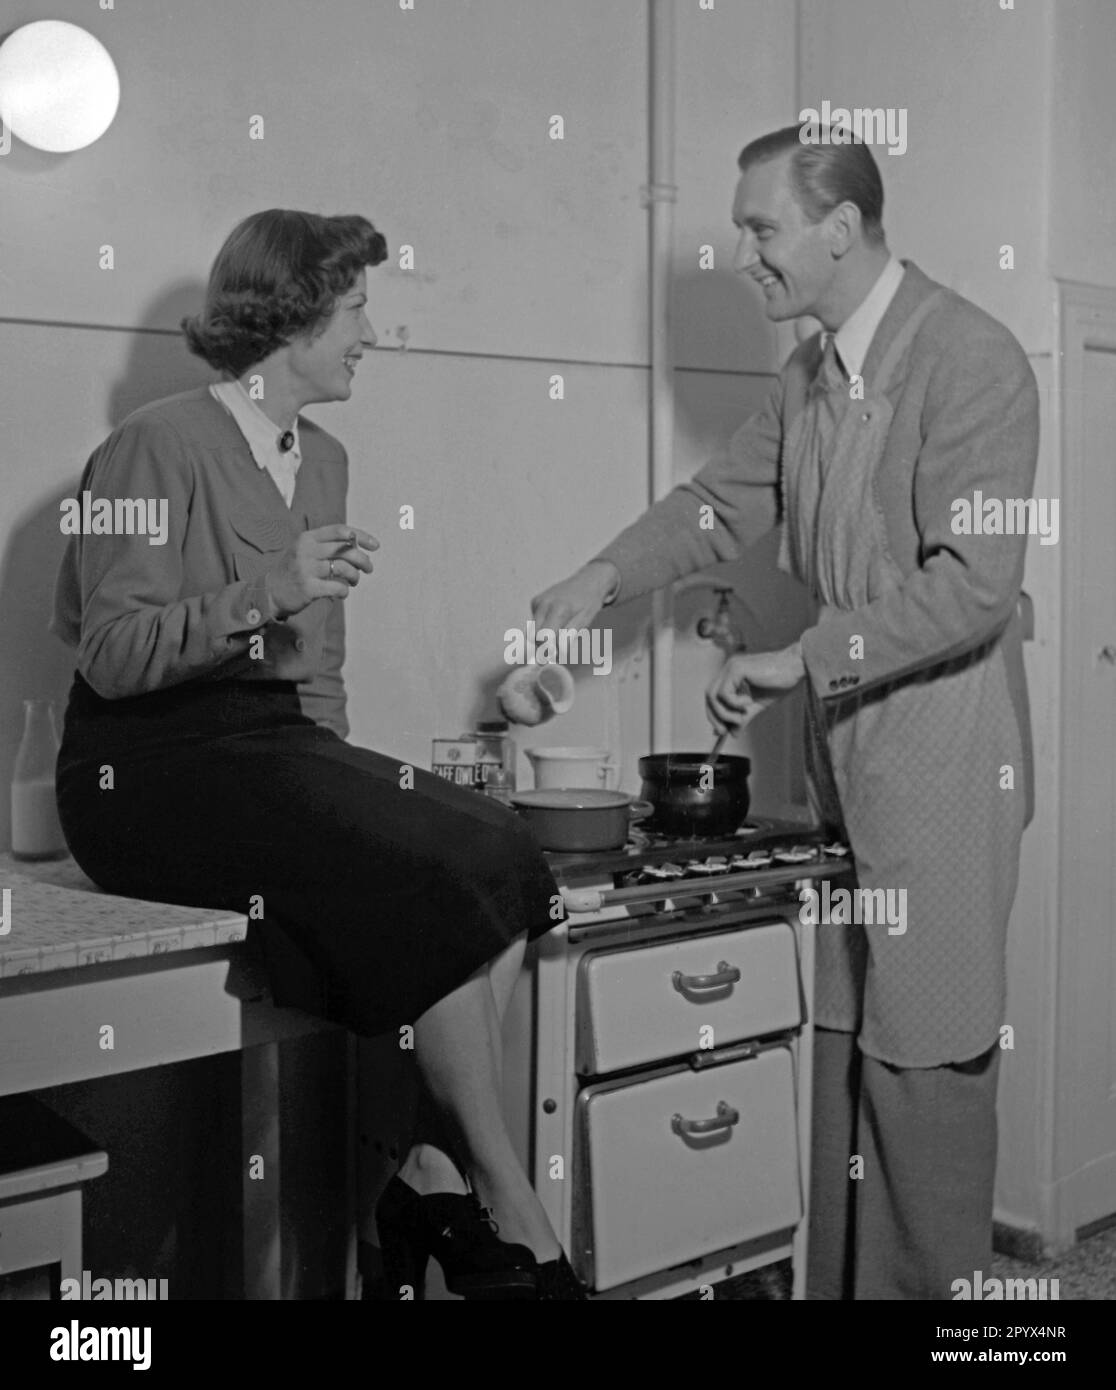 A man flirts with a woman in the kitchen. Undated picture, probably from the year 1950. Stock Photo